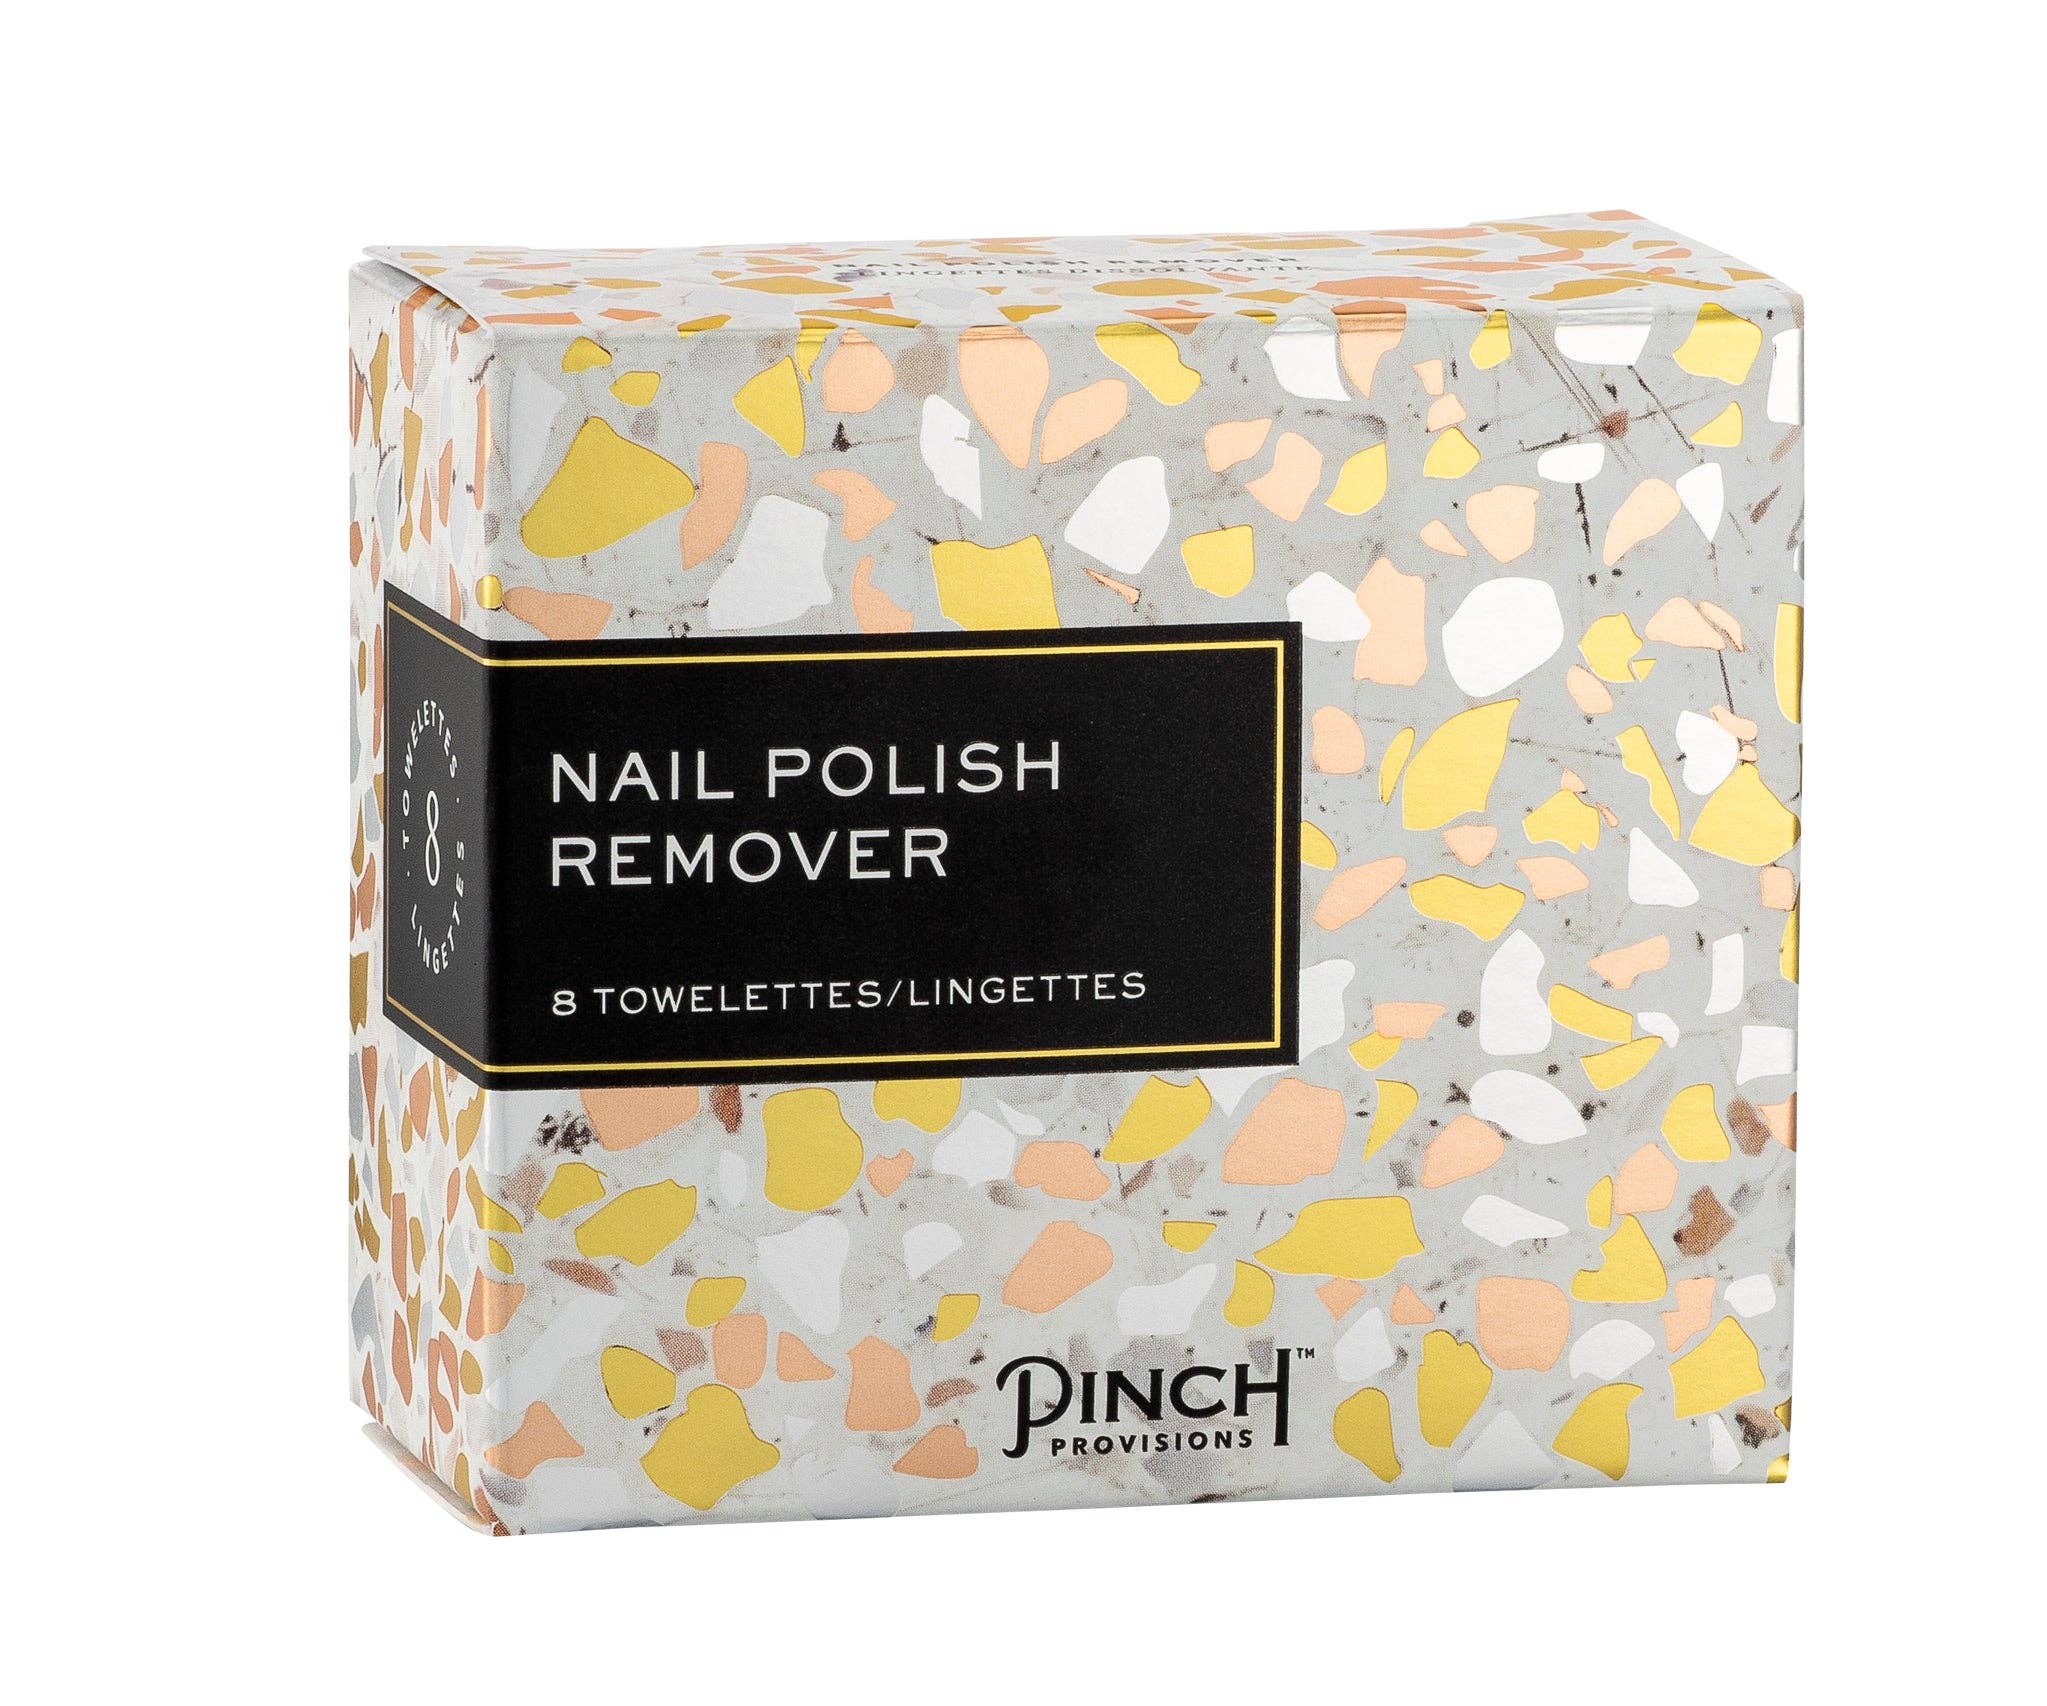 Pinch Provisions - Nail Polish Remover Towelette